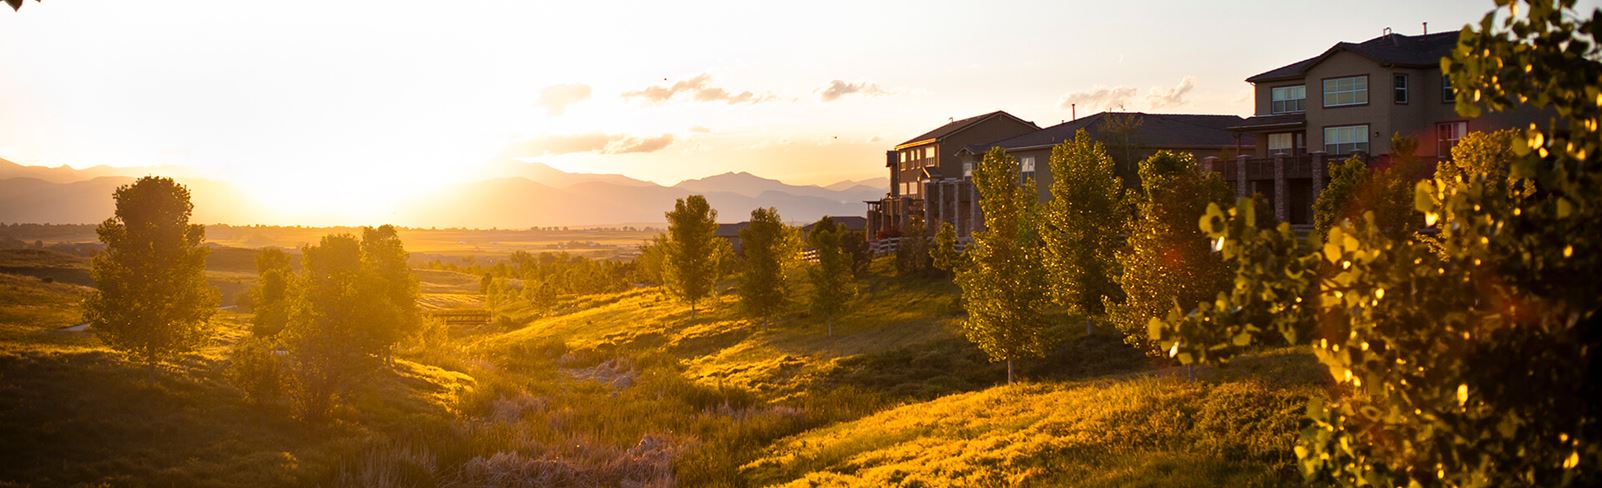 View of nature surrounding Anthem in Broomfield, CO | New Homes in Broomfield, Co from Anthem